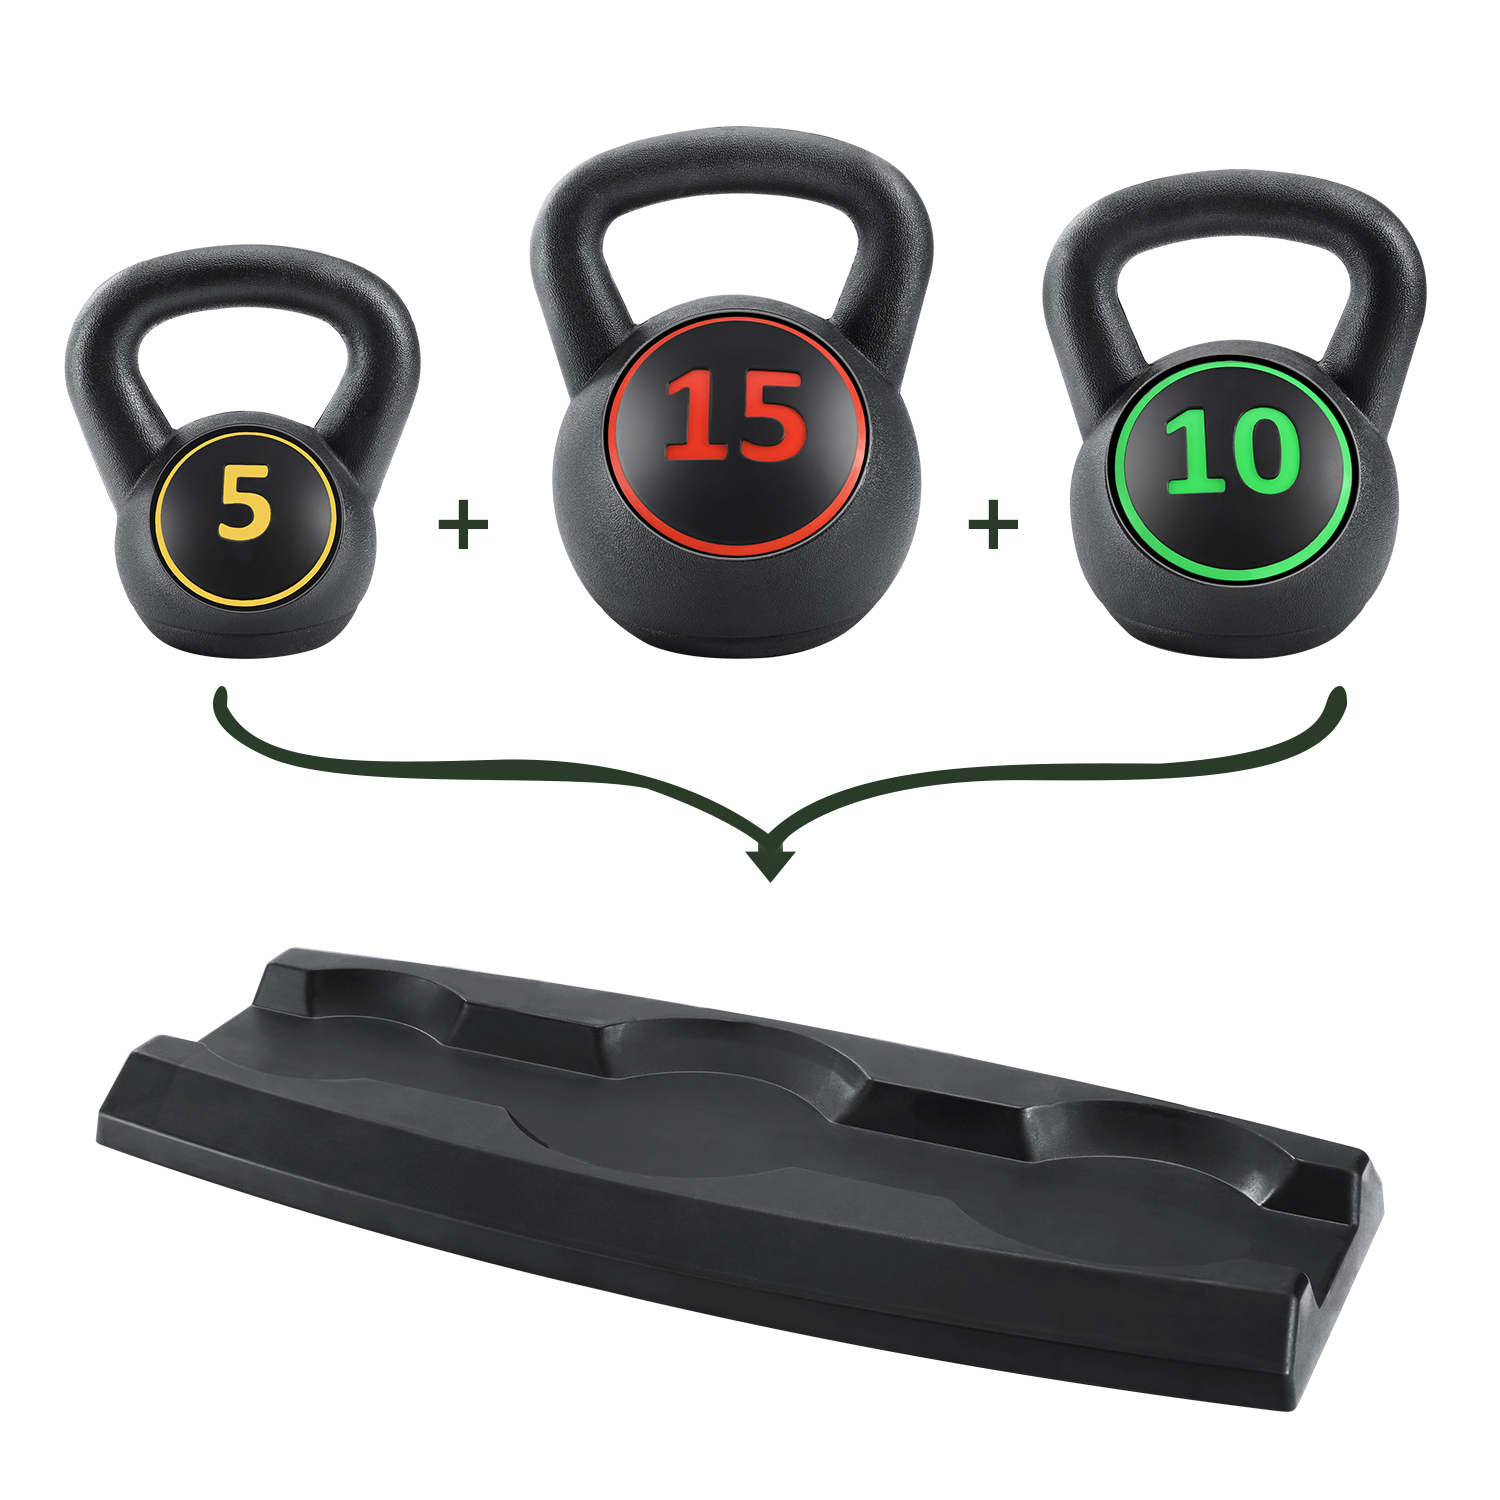 MaxKare Kettlebell Set 3-Piece Wide Handle HDPE Coated 5 Lb., 10 Lb., 15 Lb. Weights Kettlebells with Storage Exercise Fitness Rack - image 5 of 10